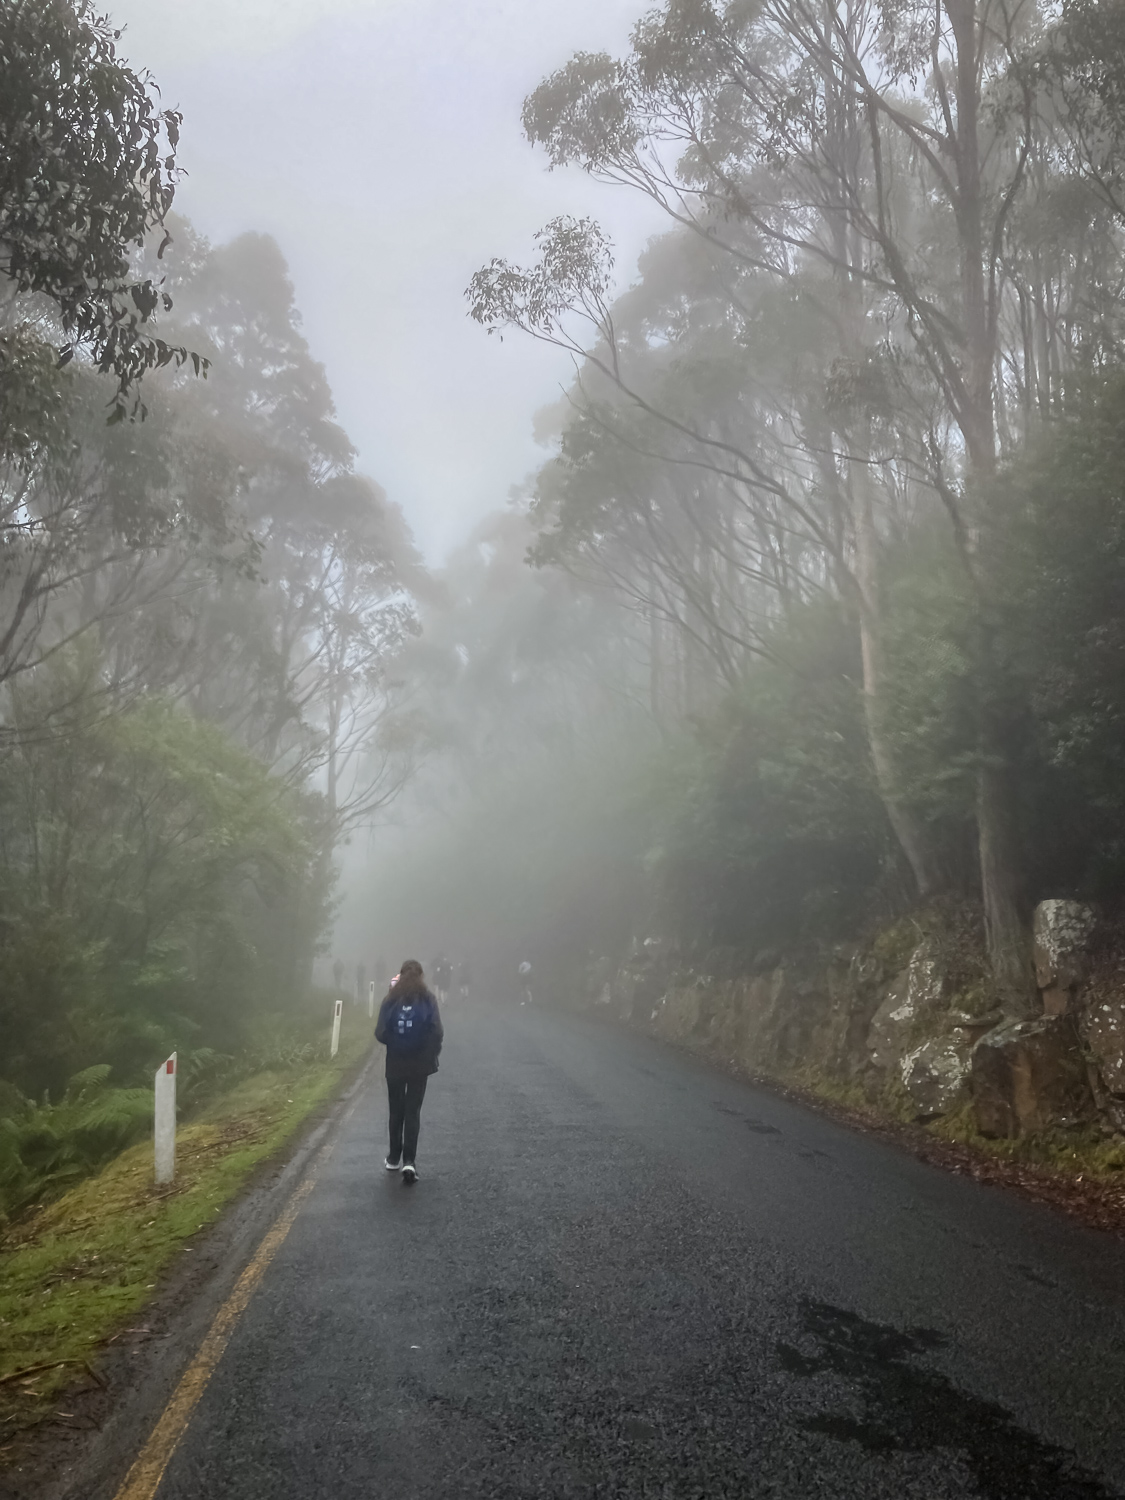 A walker, walking way from the camera, on a misty tree lined road